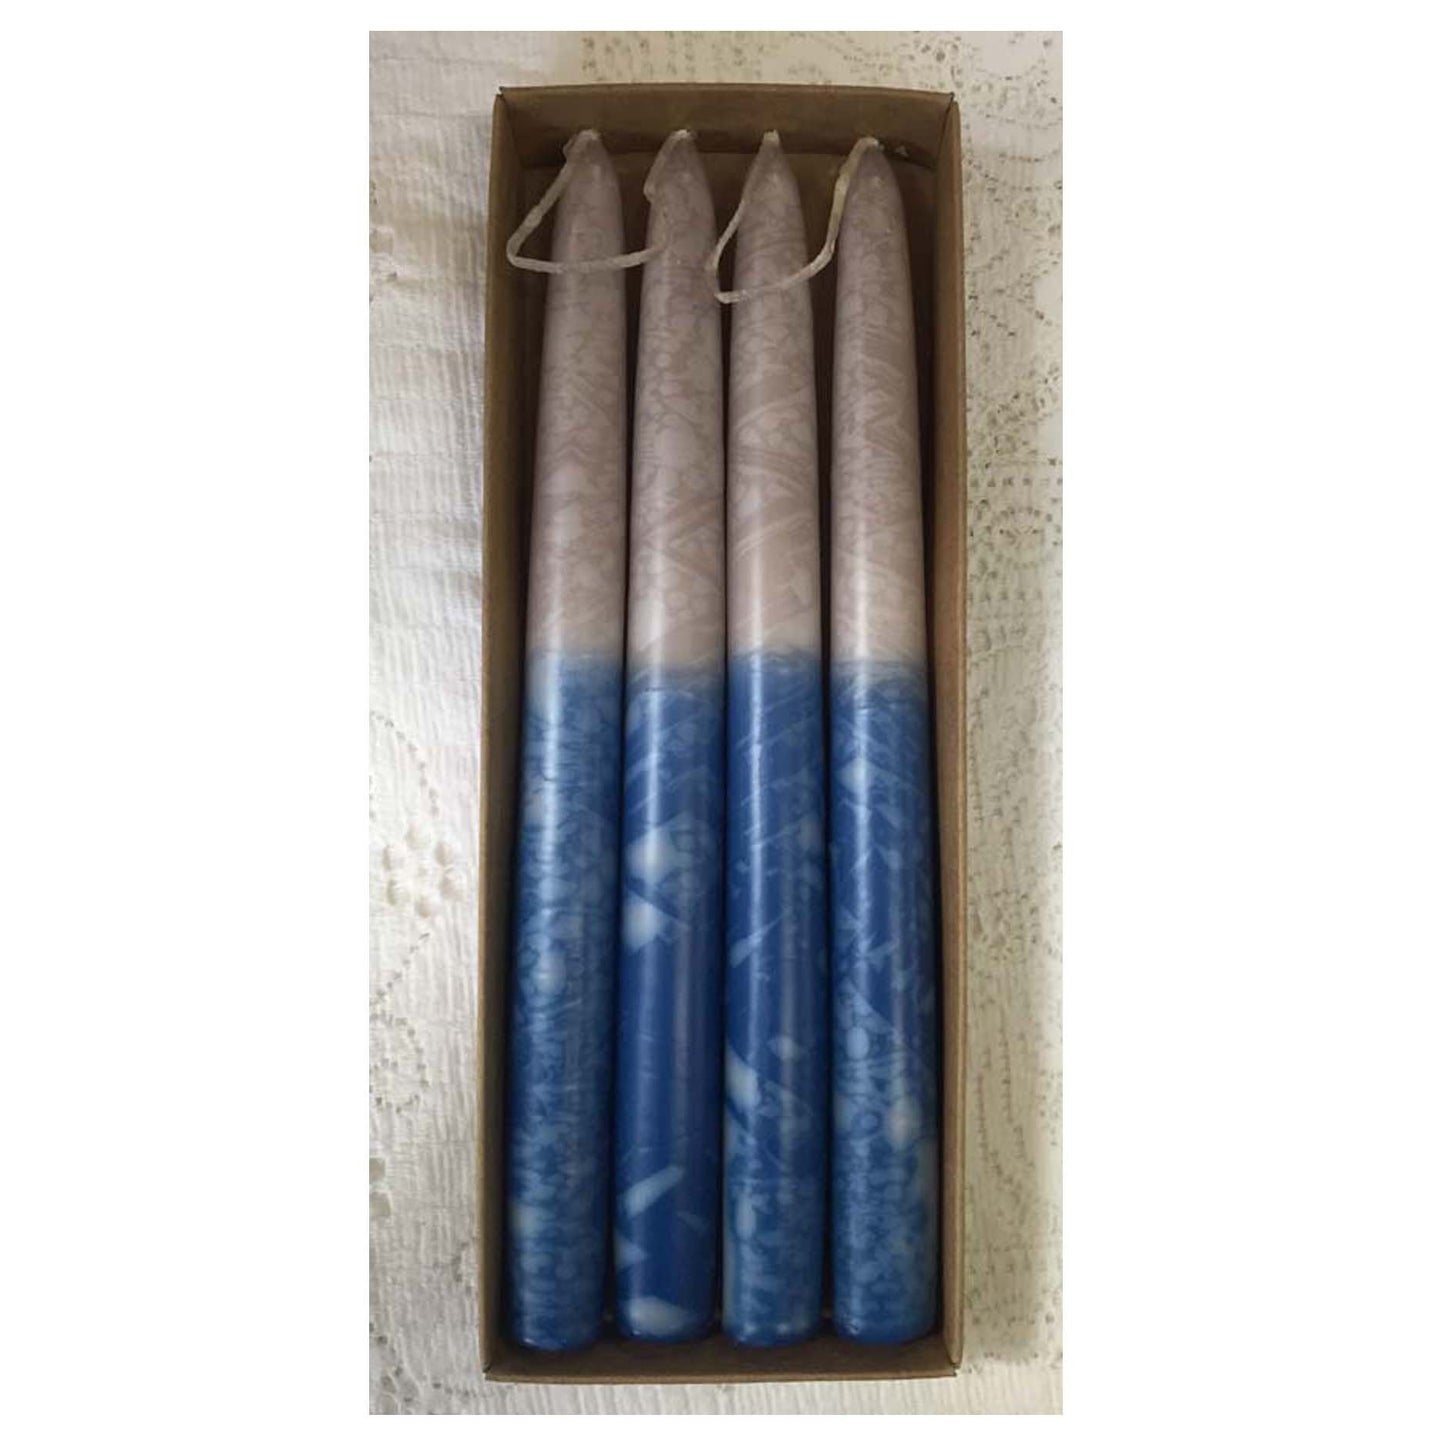 Multi-Coloured Tapers, grey and dark blue - Fanny Bay Candle Company